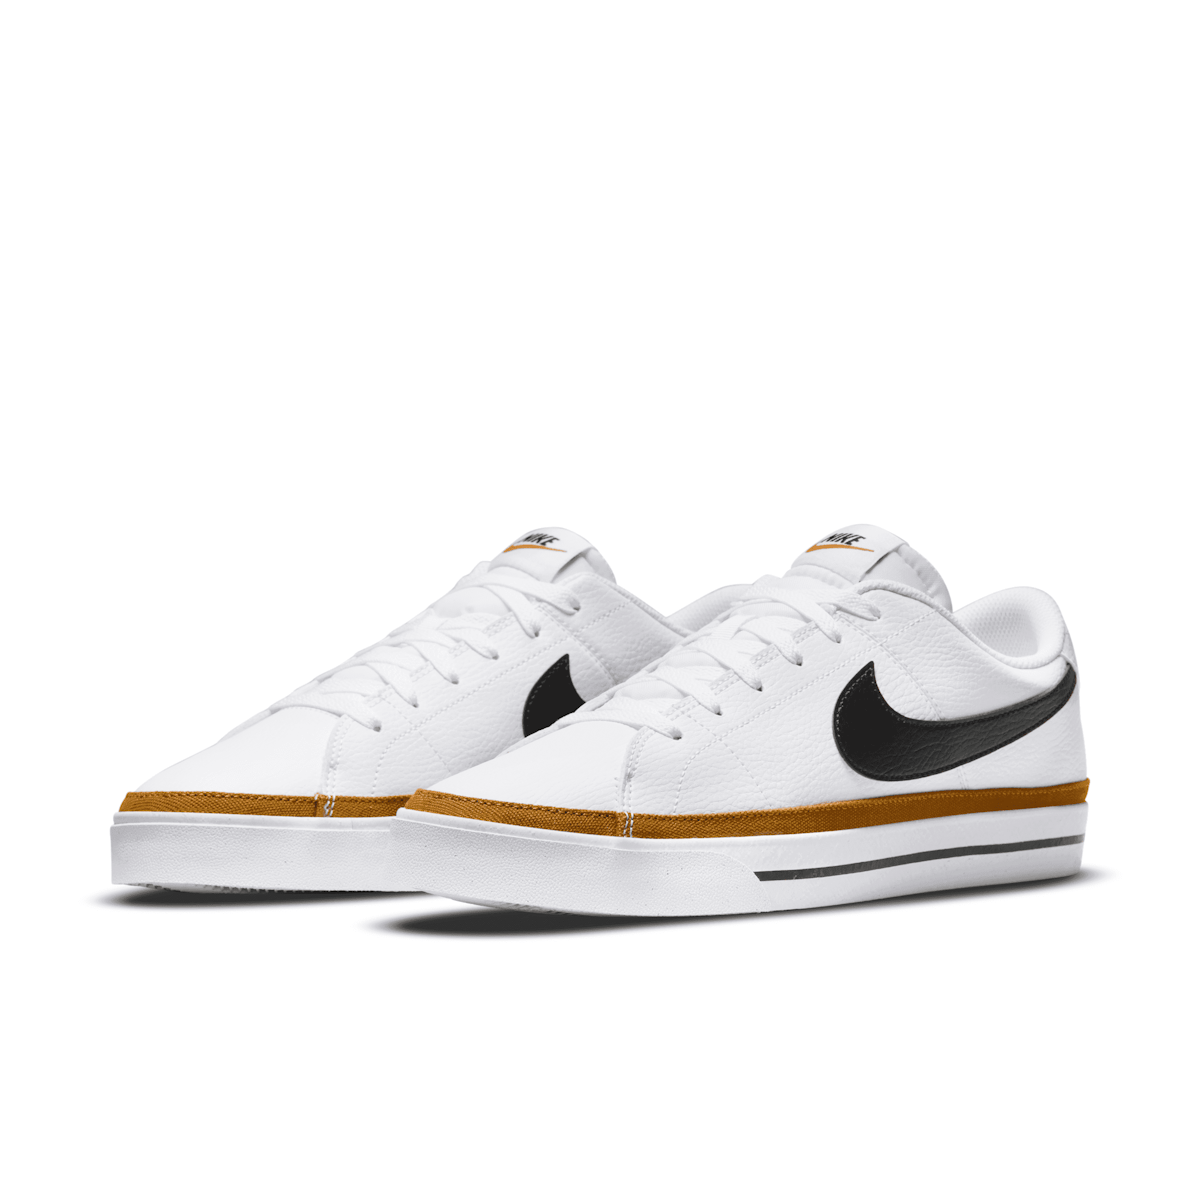 Nike Court Raffles - and Legacy White in Release Date DH3162-100 Shoes